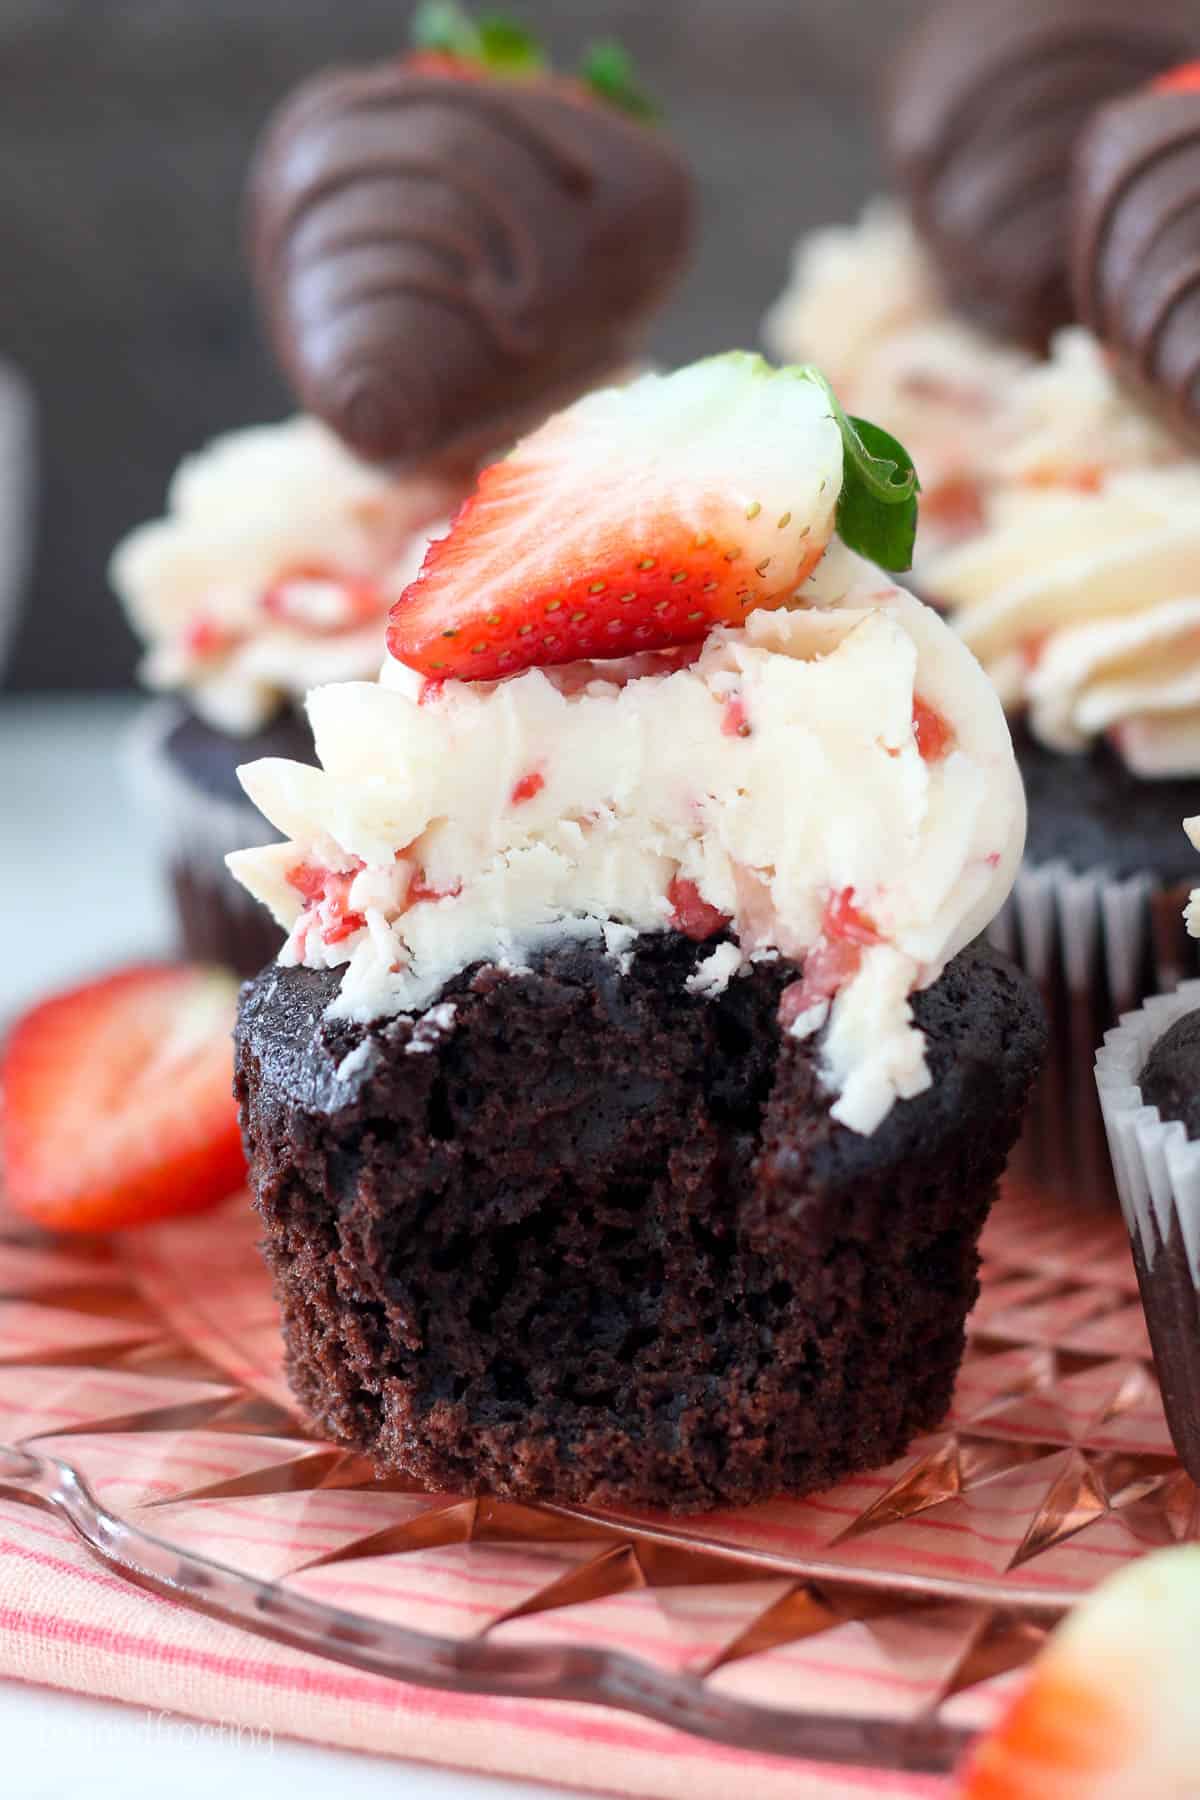 A chocolate cupcake with strawberry frosting has a big bite taken out of it showing the inside of the cupcake and frosting.